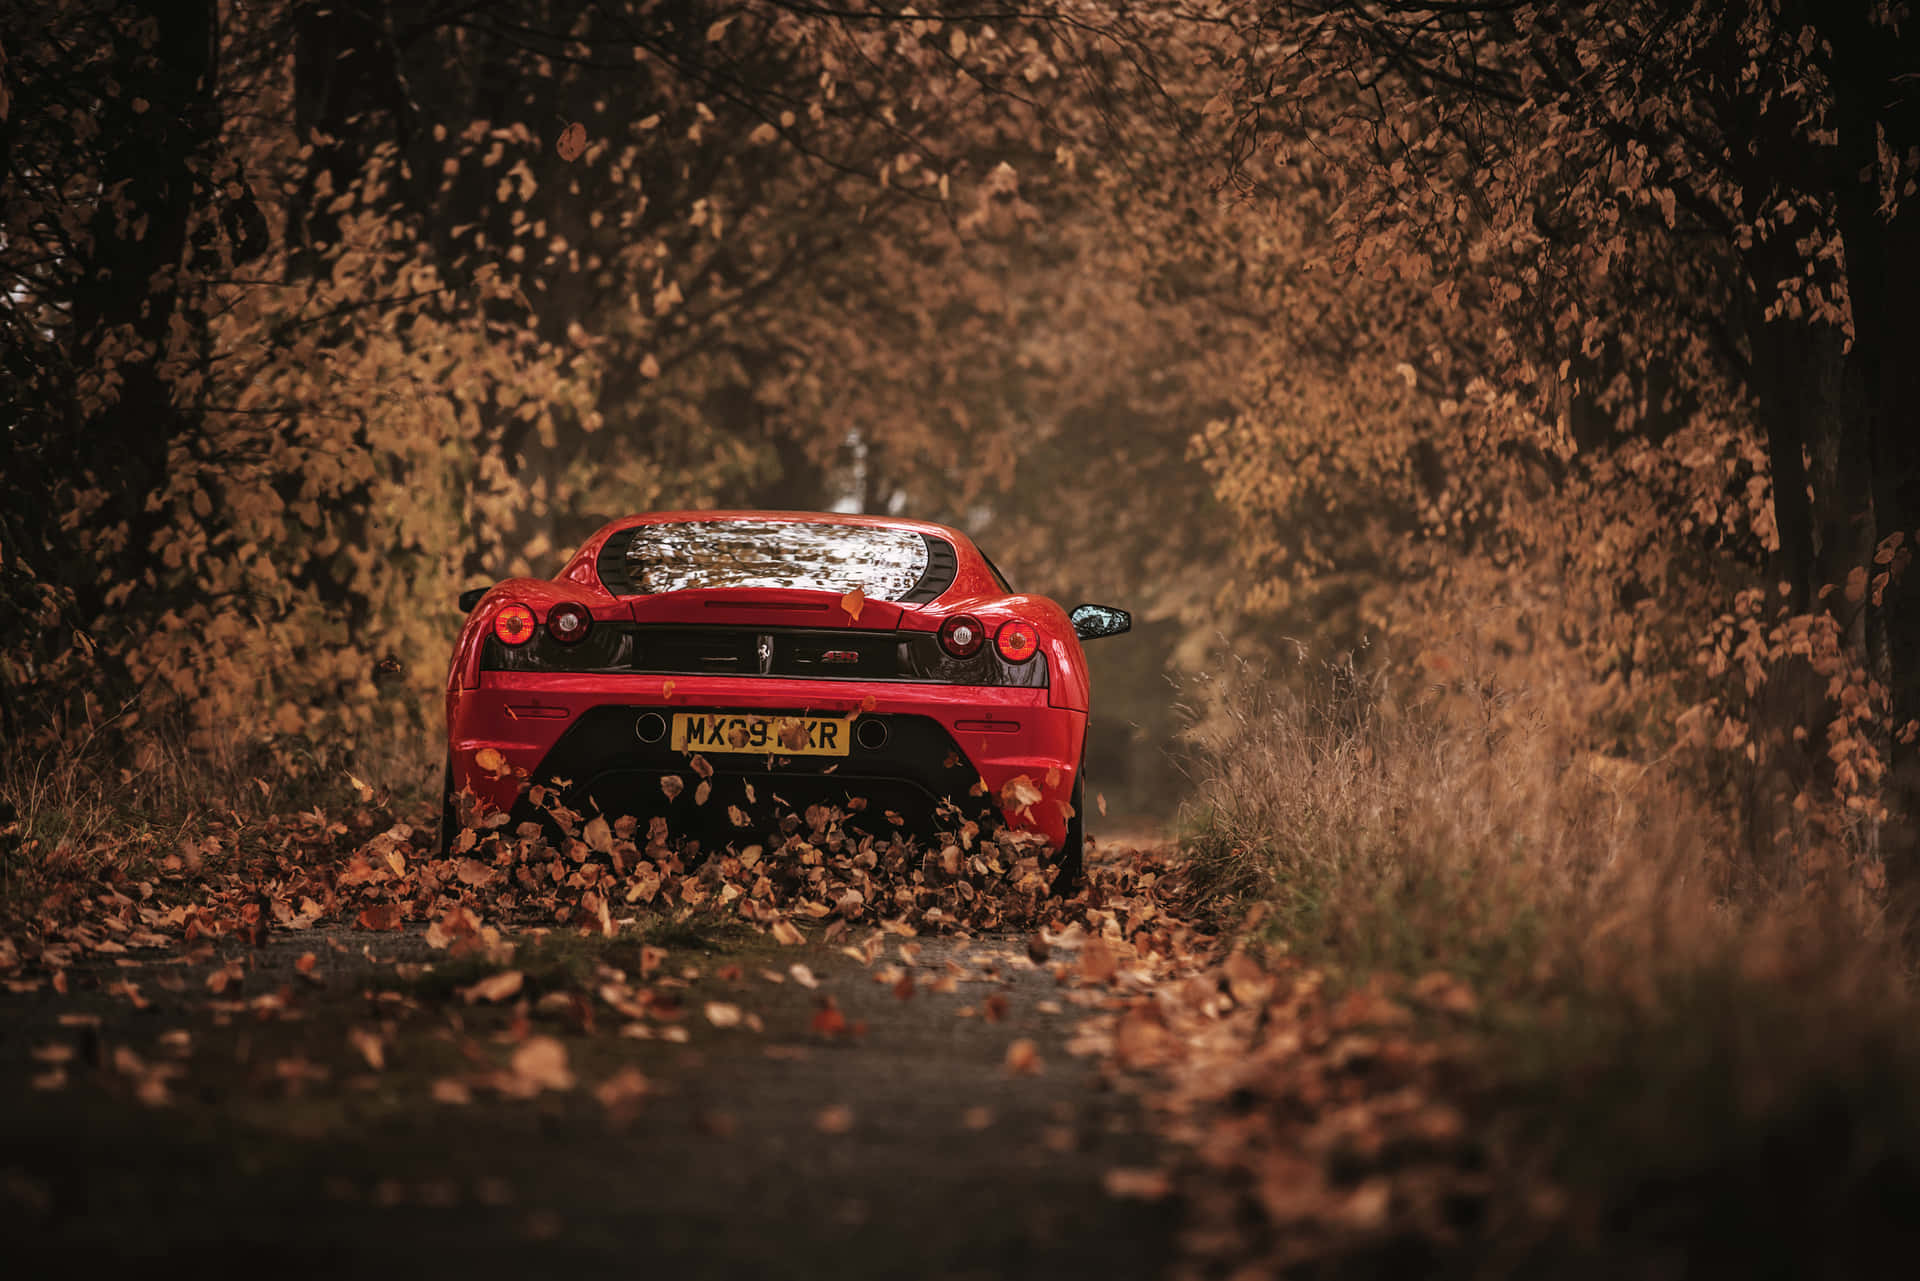 "There is nothing quite like the thrill of a cool Ferrari car" Wallpaper